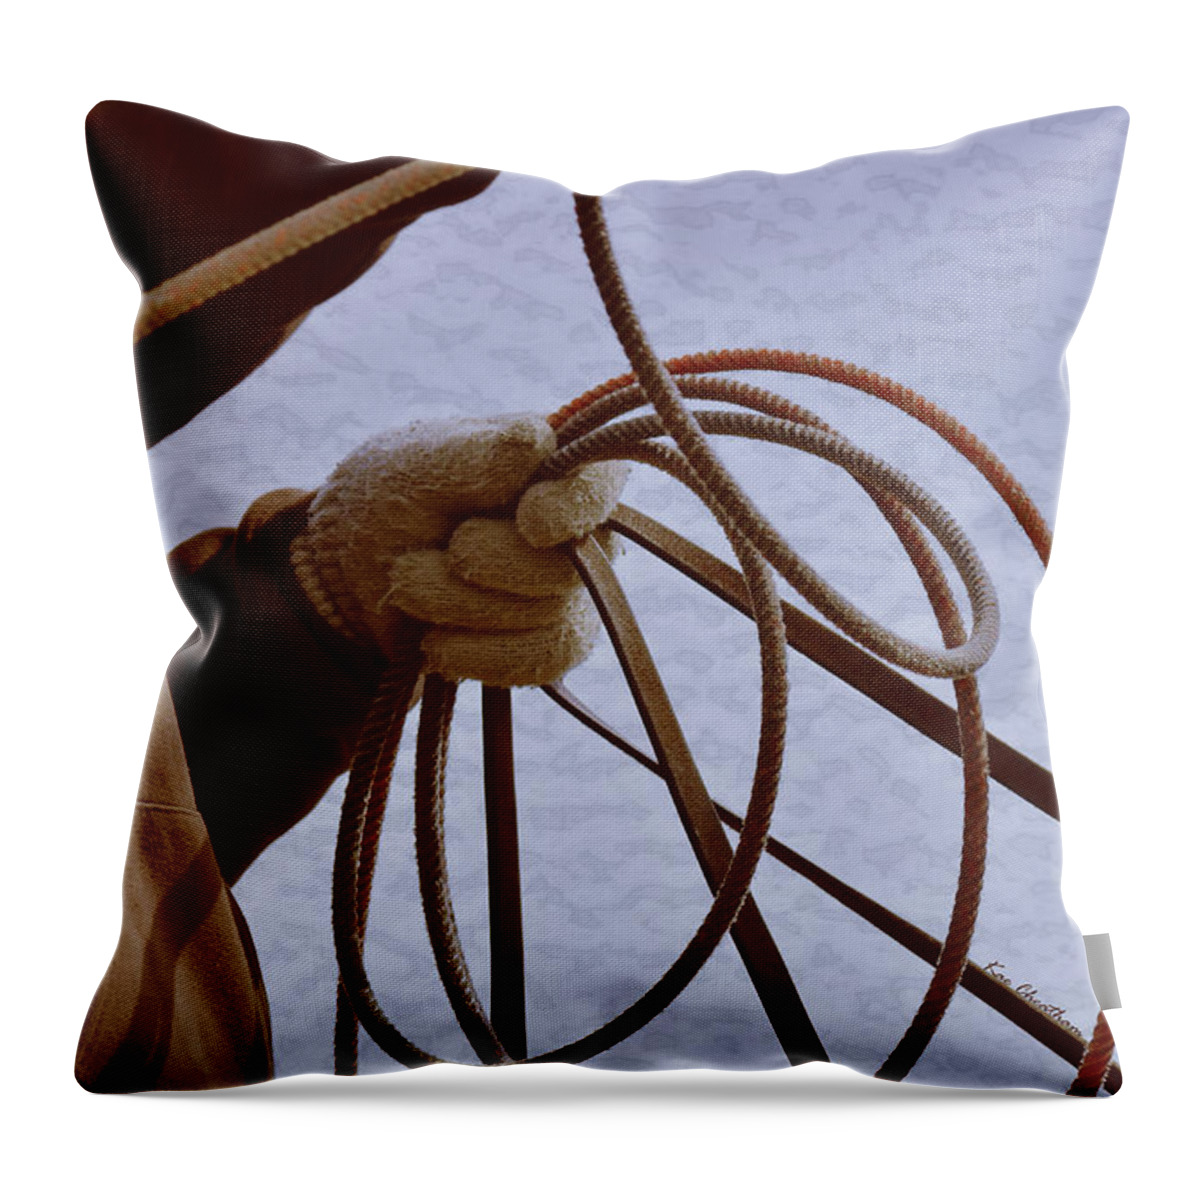 Roper Throw Pillow featuring the photograph Ready to Rope by Kae Cheatham